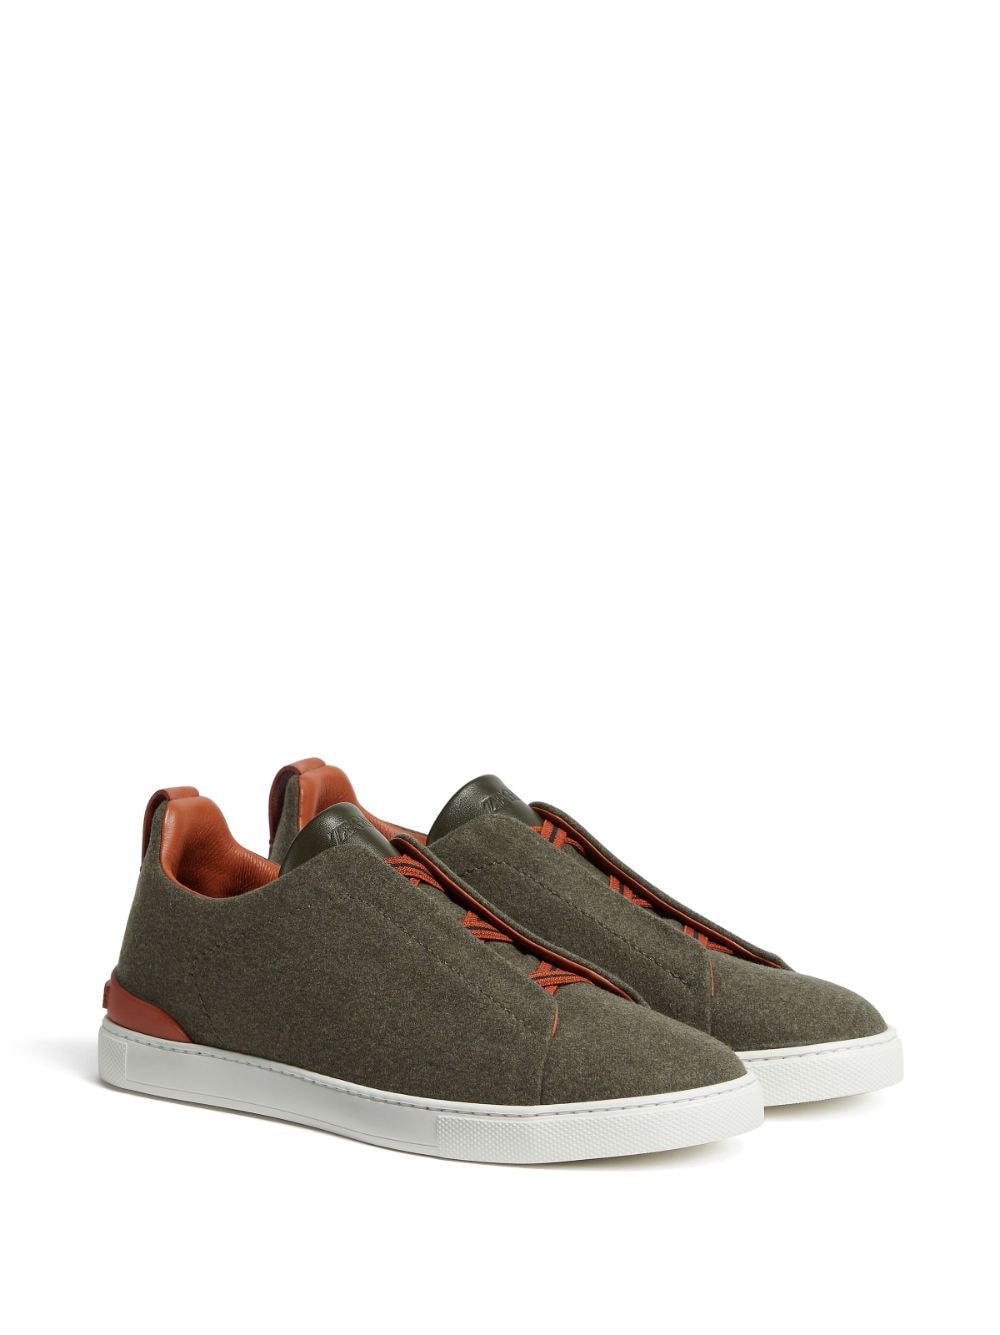 Image 2 of Zegna Triple Stitch slip-on sneakers